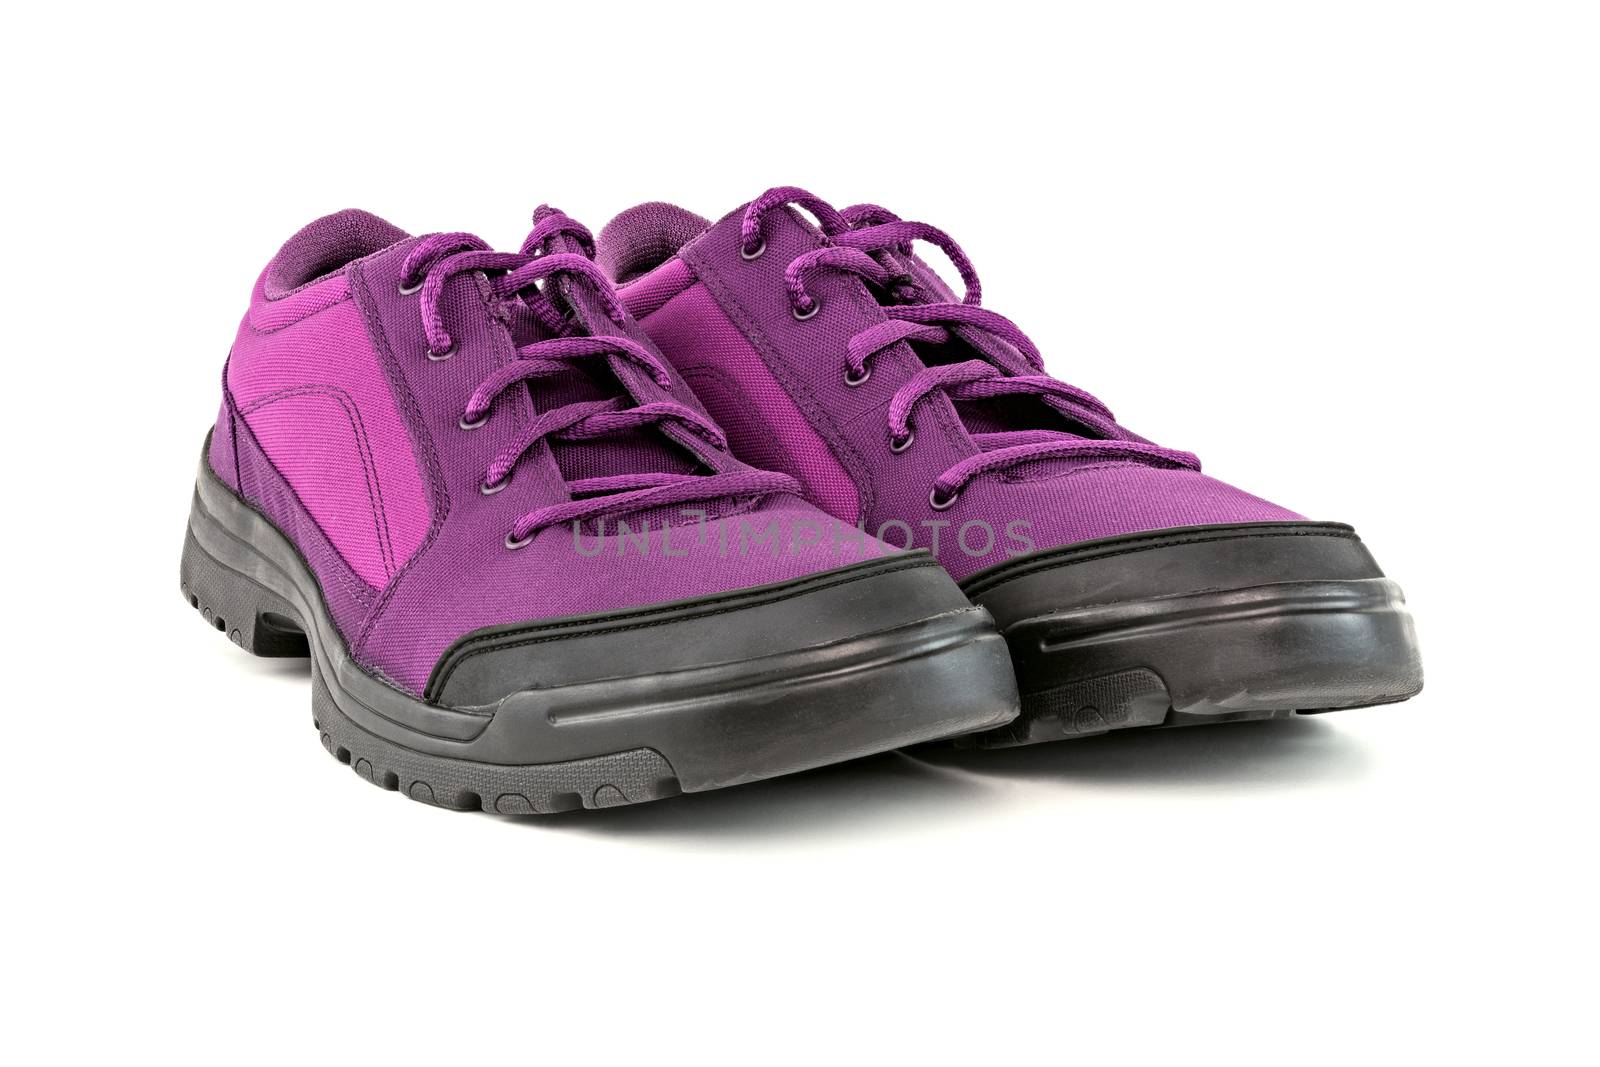 a pair of simple cheap purple hiking shoes isolated on white background - perspective close-up view by z1b